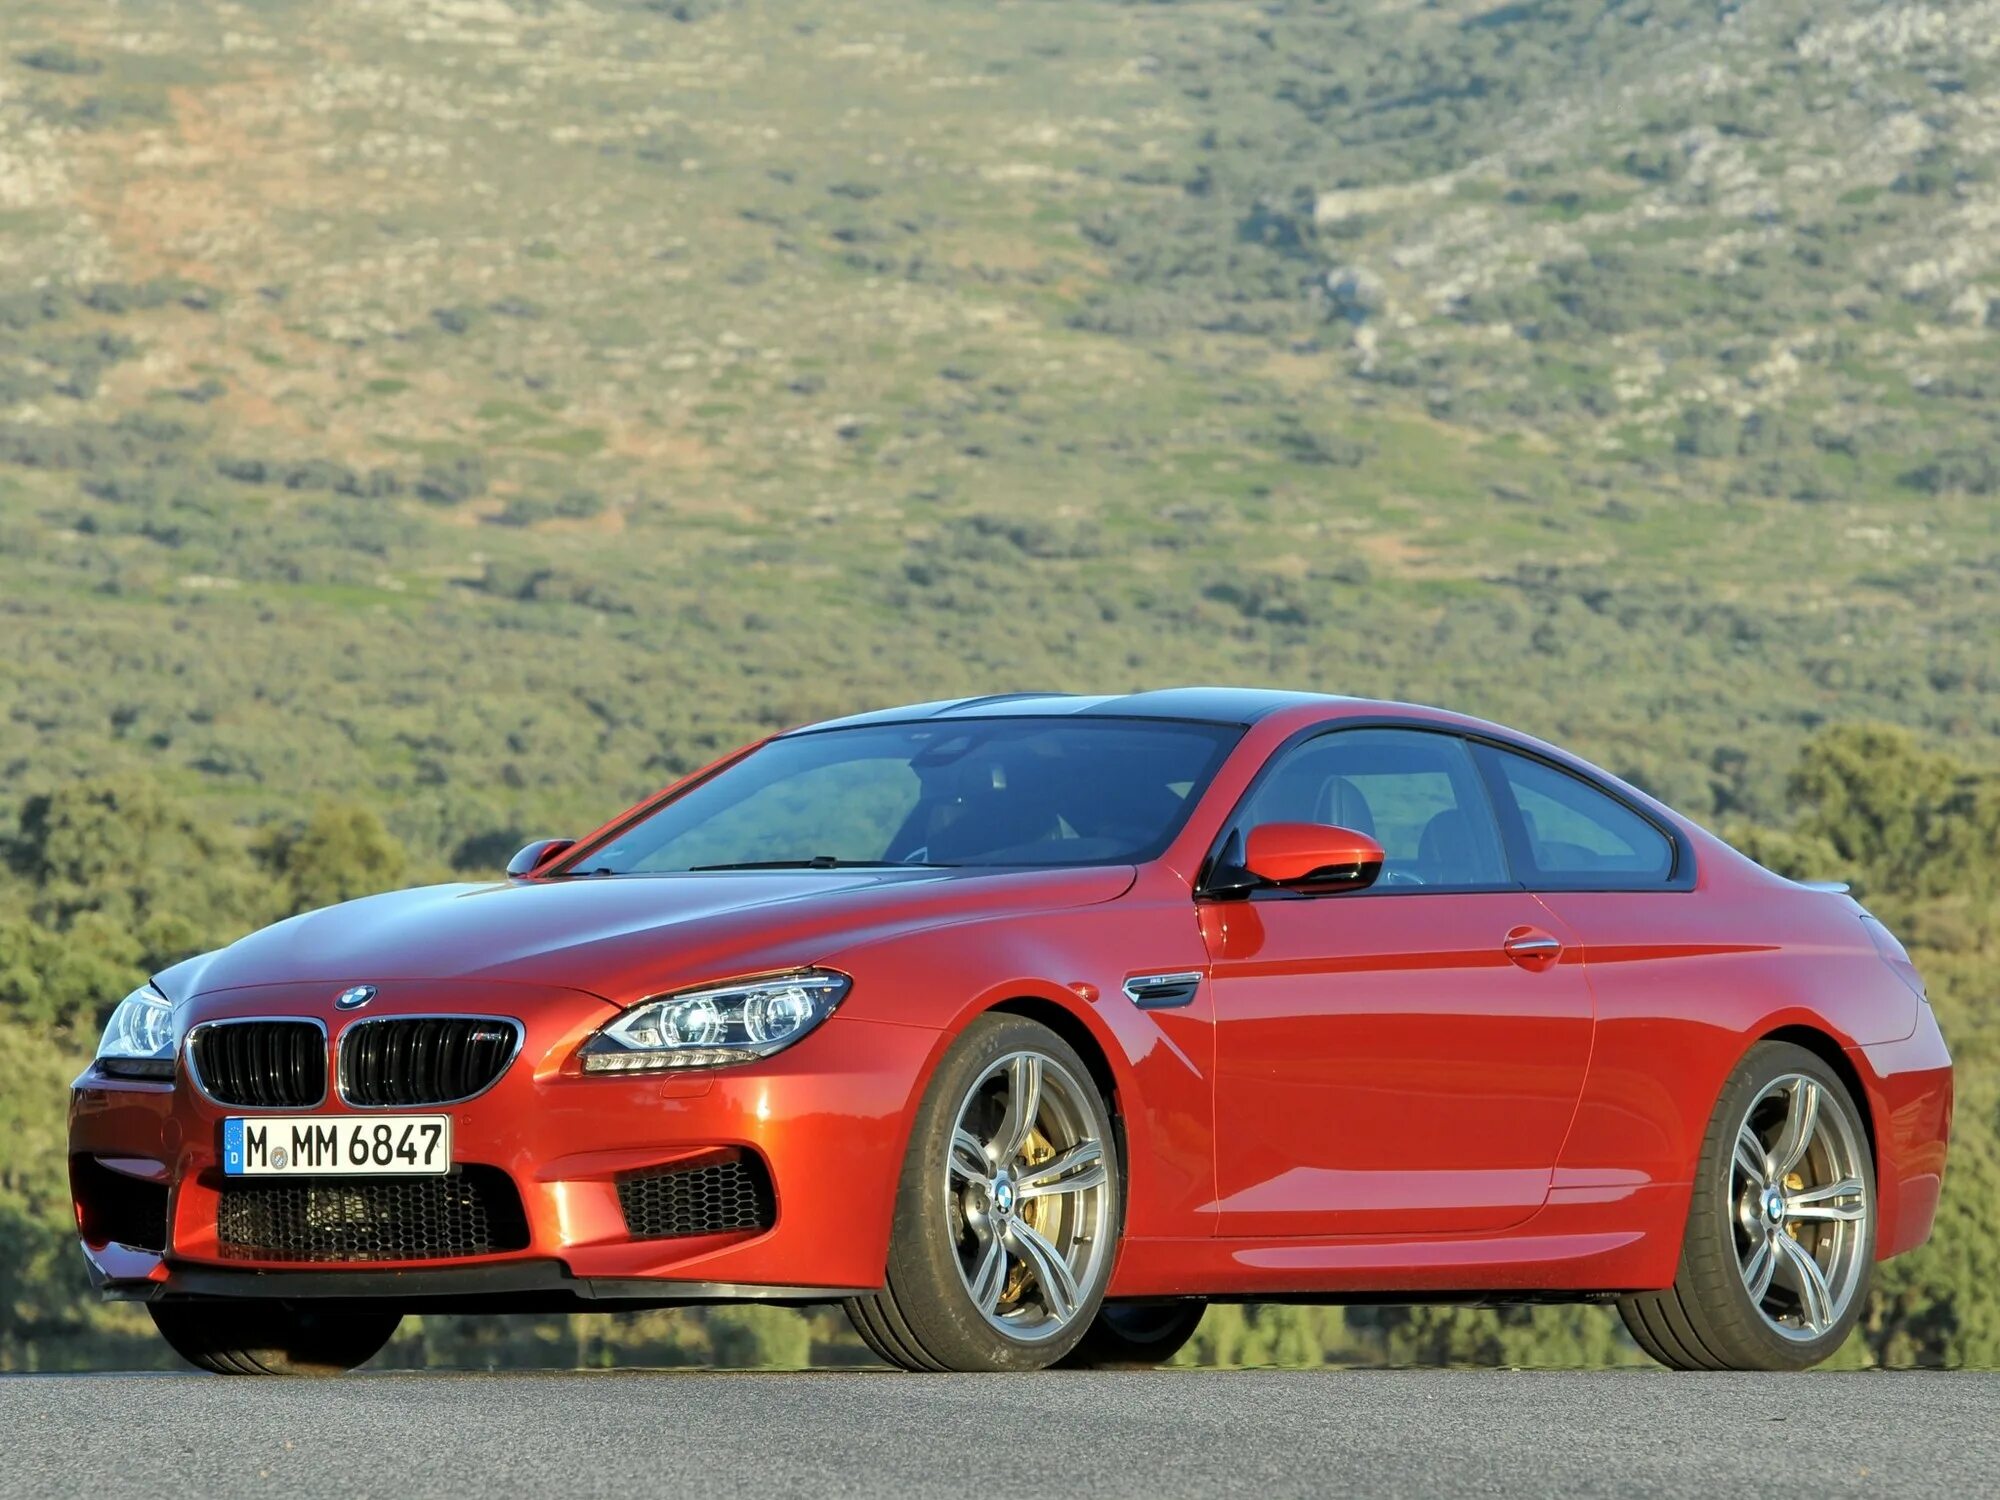 Bmw m coupe. BMW m6 f06. BMW m6 Coupe 2012. BMW m6 Coupe 2013. BMW m6 f13 Coupe.